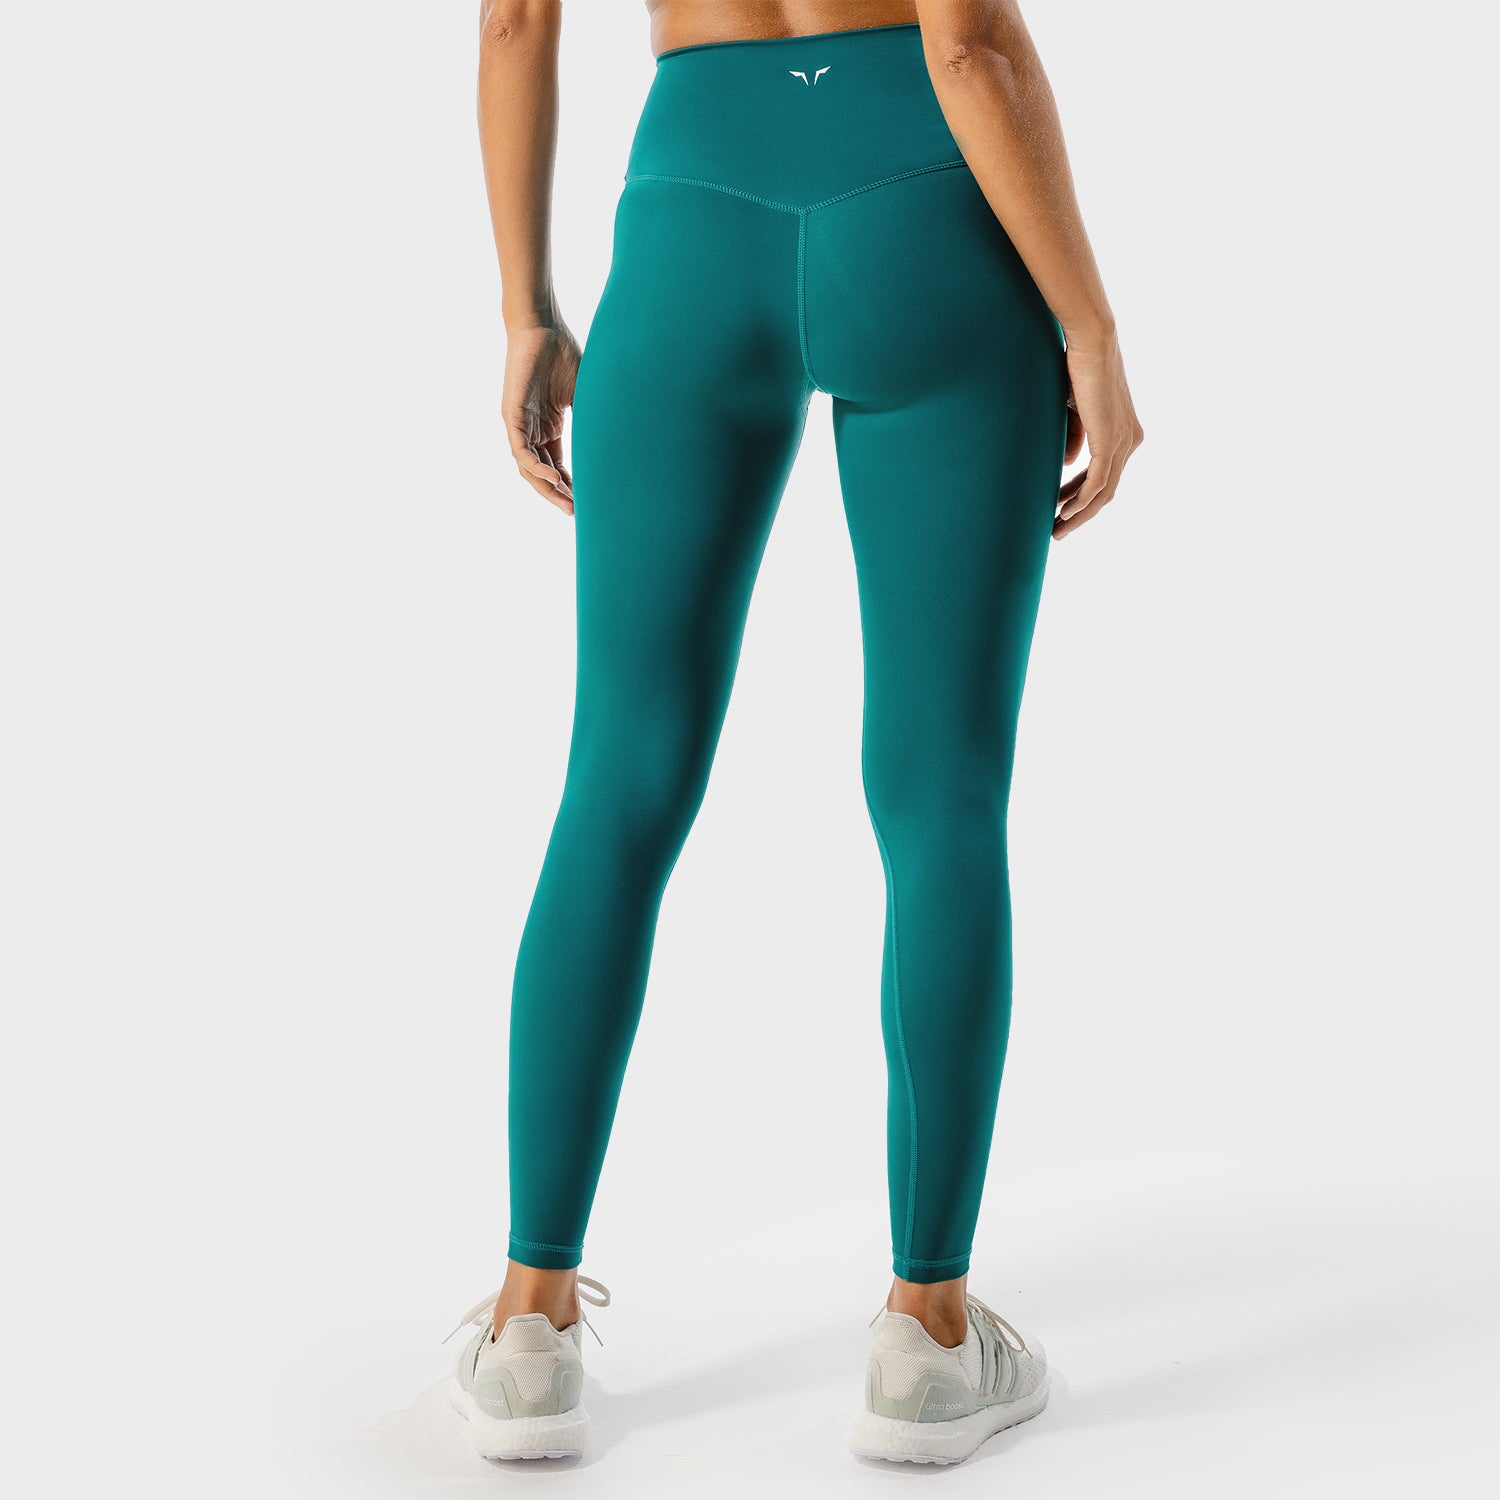 squatwolf-gym-leggings-for-women-core-agile-leggings-teal-workout-clothes